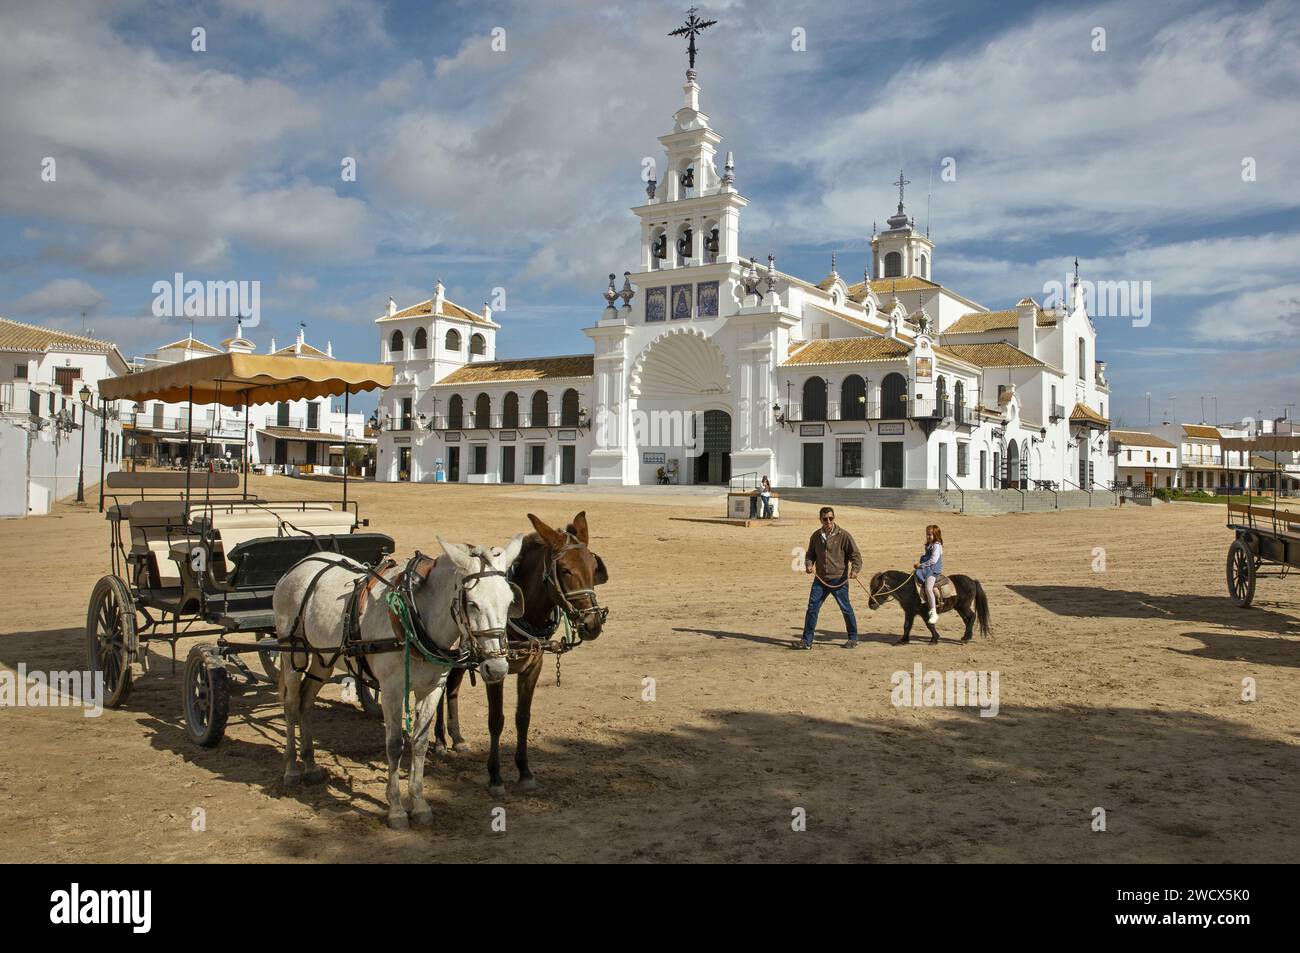 Spain, Andalusia, El Rocío, man walking his little daughter on a pony in a sandy street with horse-drawn carts in front of the hermitage Nuestra señora dEl Rocío Stock Photo